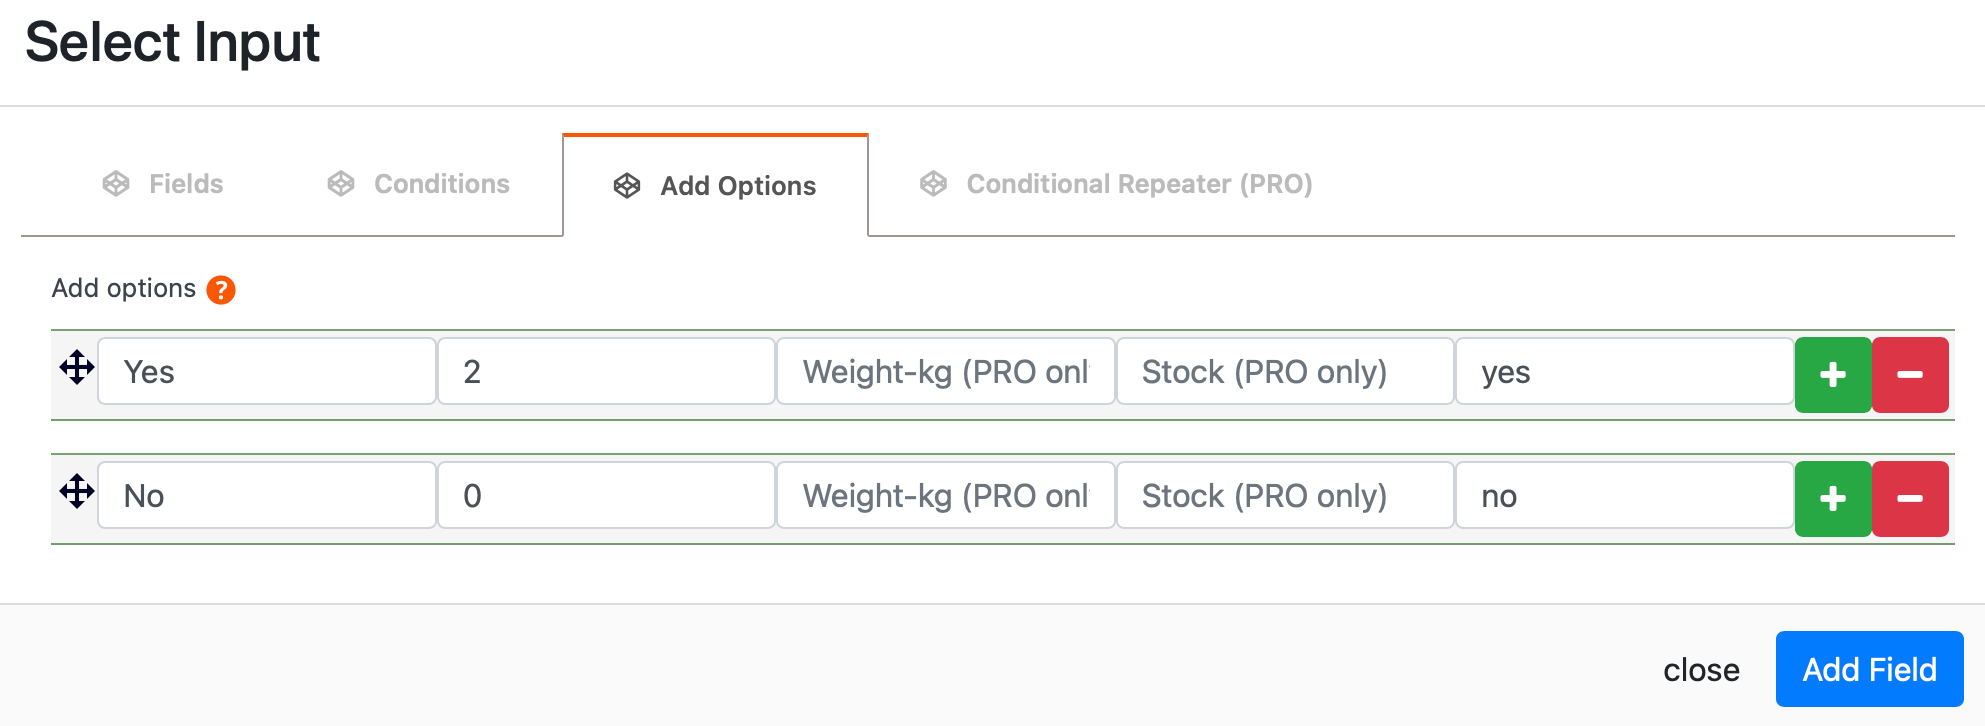 Add gift wrap options to your Select Input field